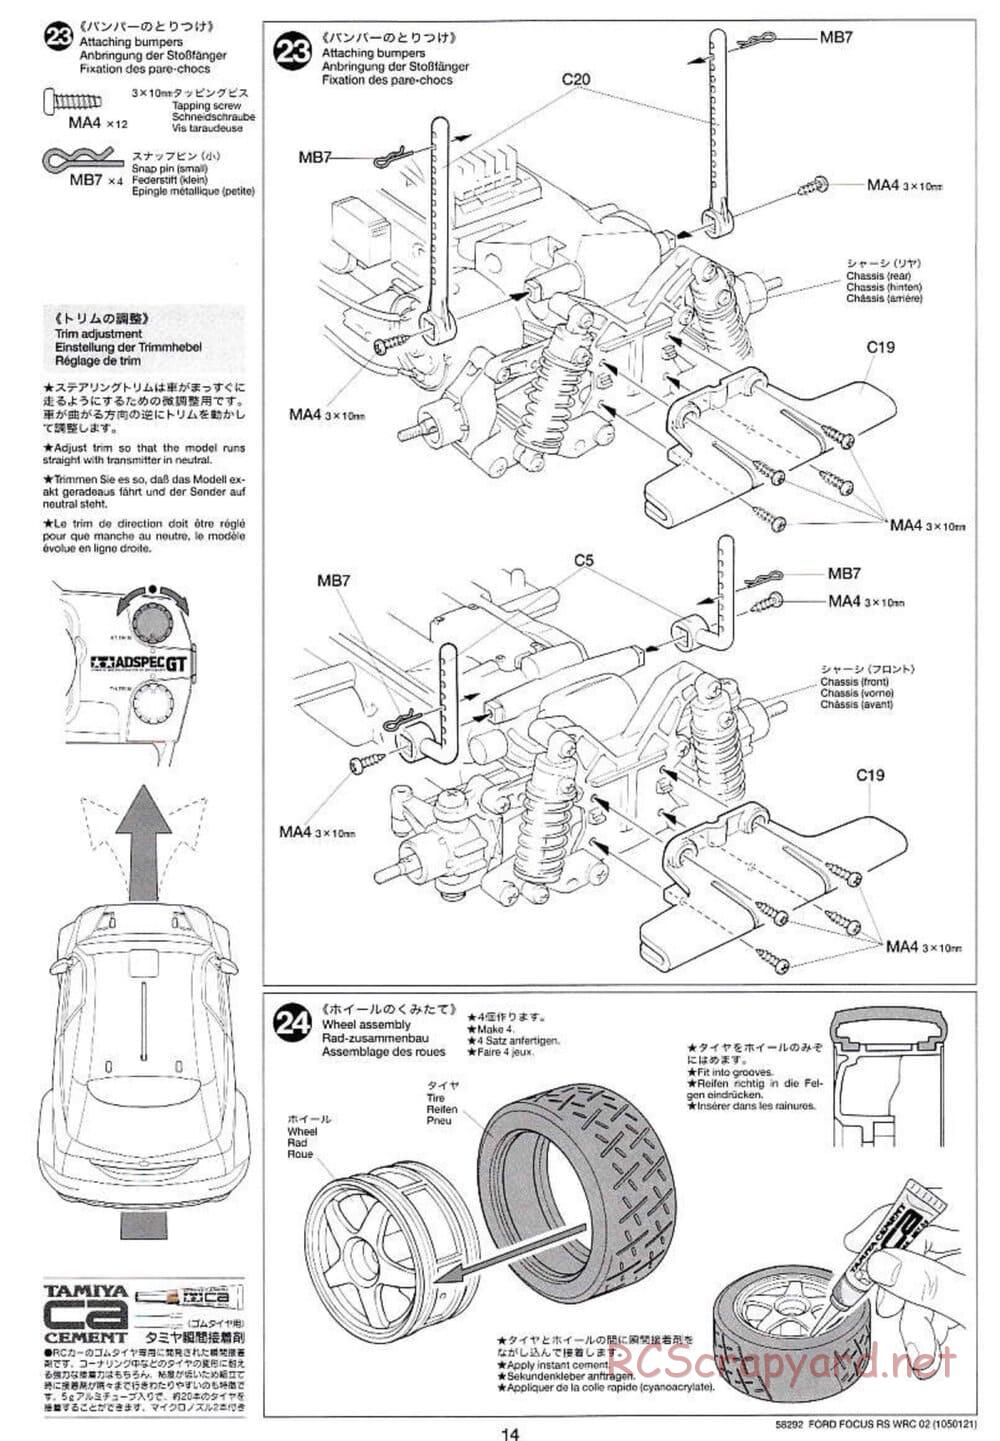 Tamiya - Ford Focus RS WRC 02 - TL-01 Chassis - Manual - Page 14